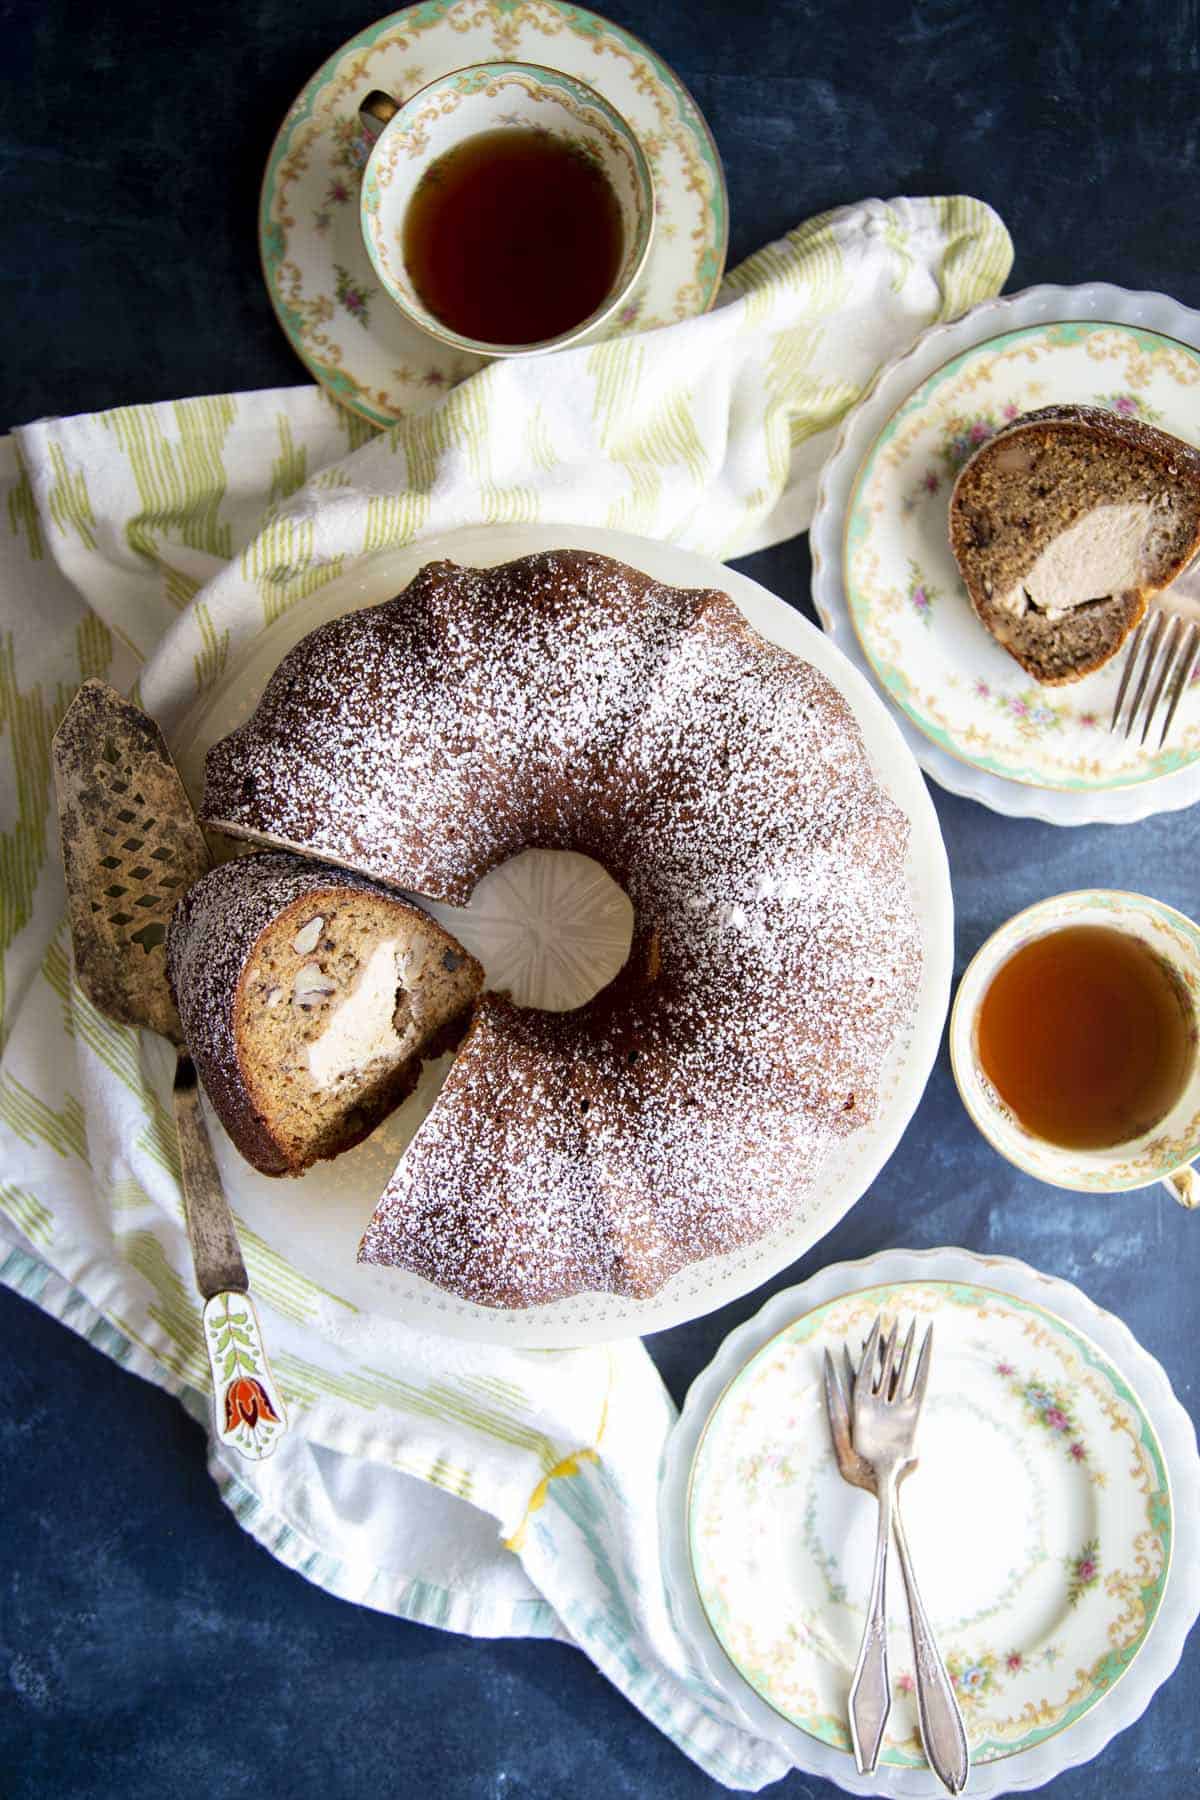 A sliced banana bundt cake on a cake stand, with tea and cake slice on plates surrounding it.